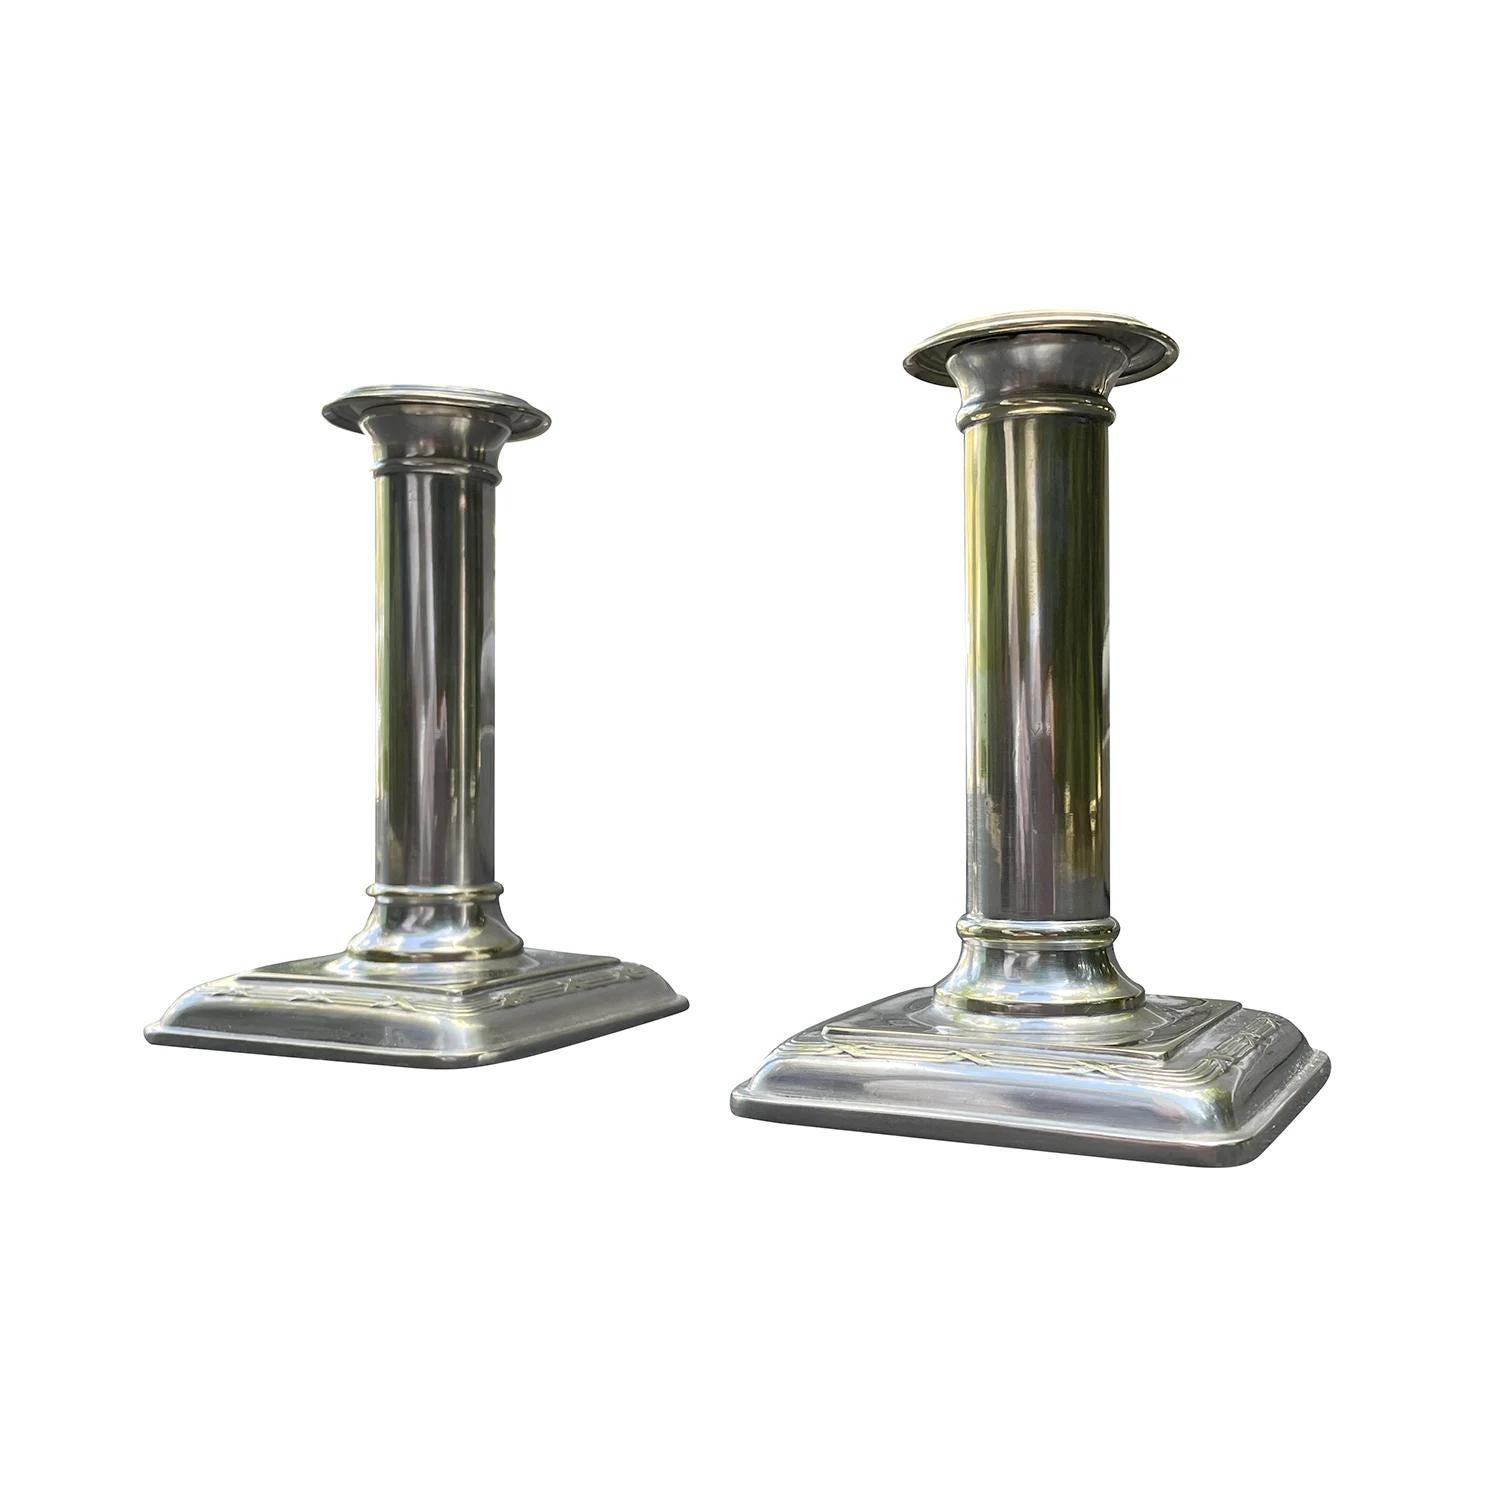 Art Deco 20th Century Swedish Pair of Nickel Silver Candlesticks, Holders by CG Hallberg For Sale